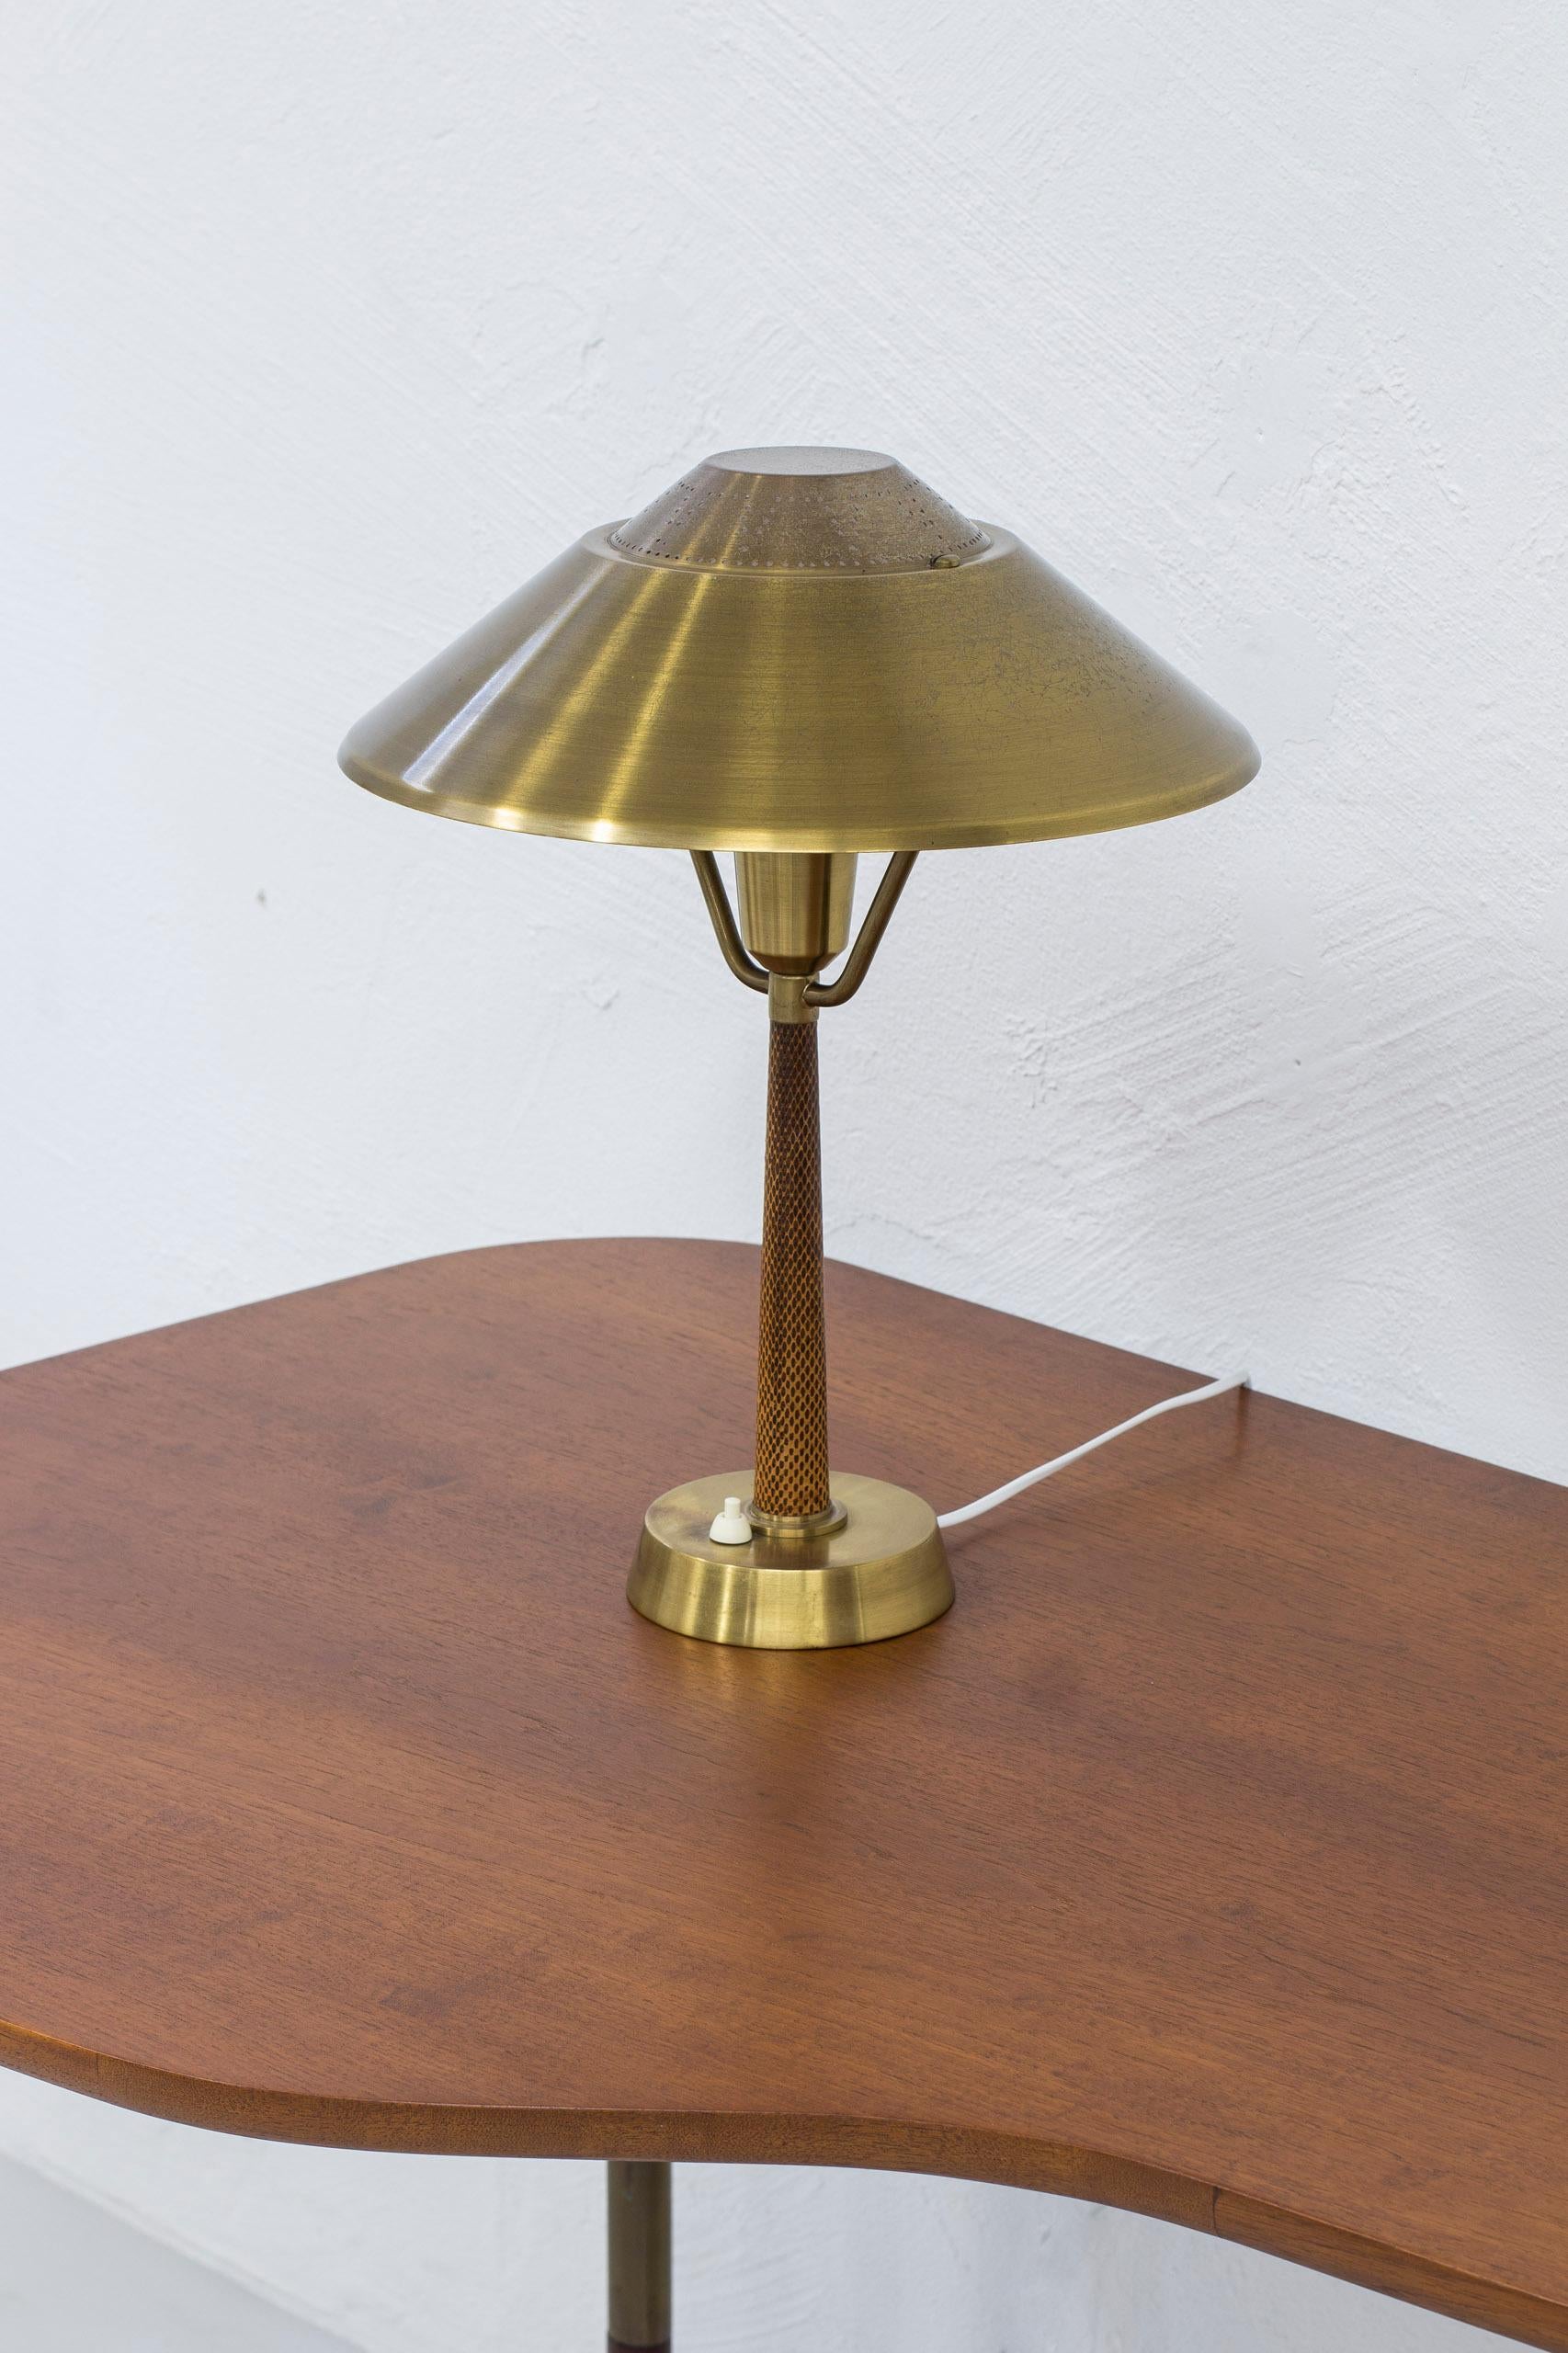 Table lamp produced in Sweden by AB E. Hansson & Co. Made from brass with original snake skinn embossed leather. Lamp shade adjustable in angle. Light switch on the base in working order. Very good vintage condition with light age related wear and